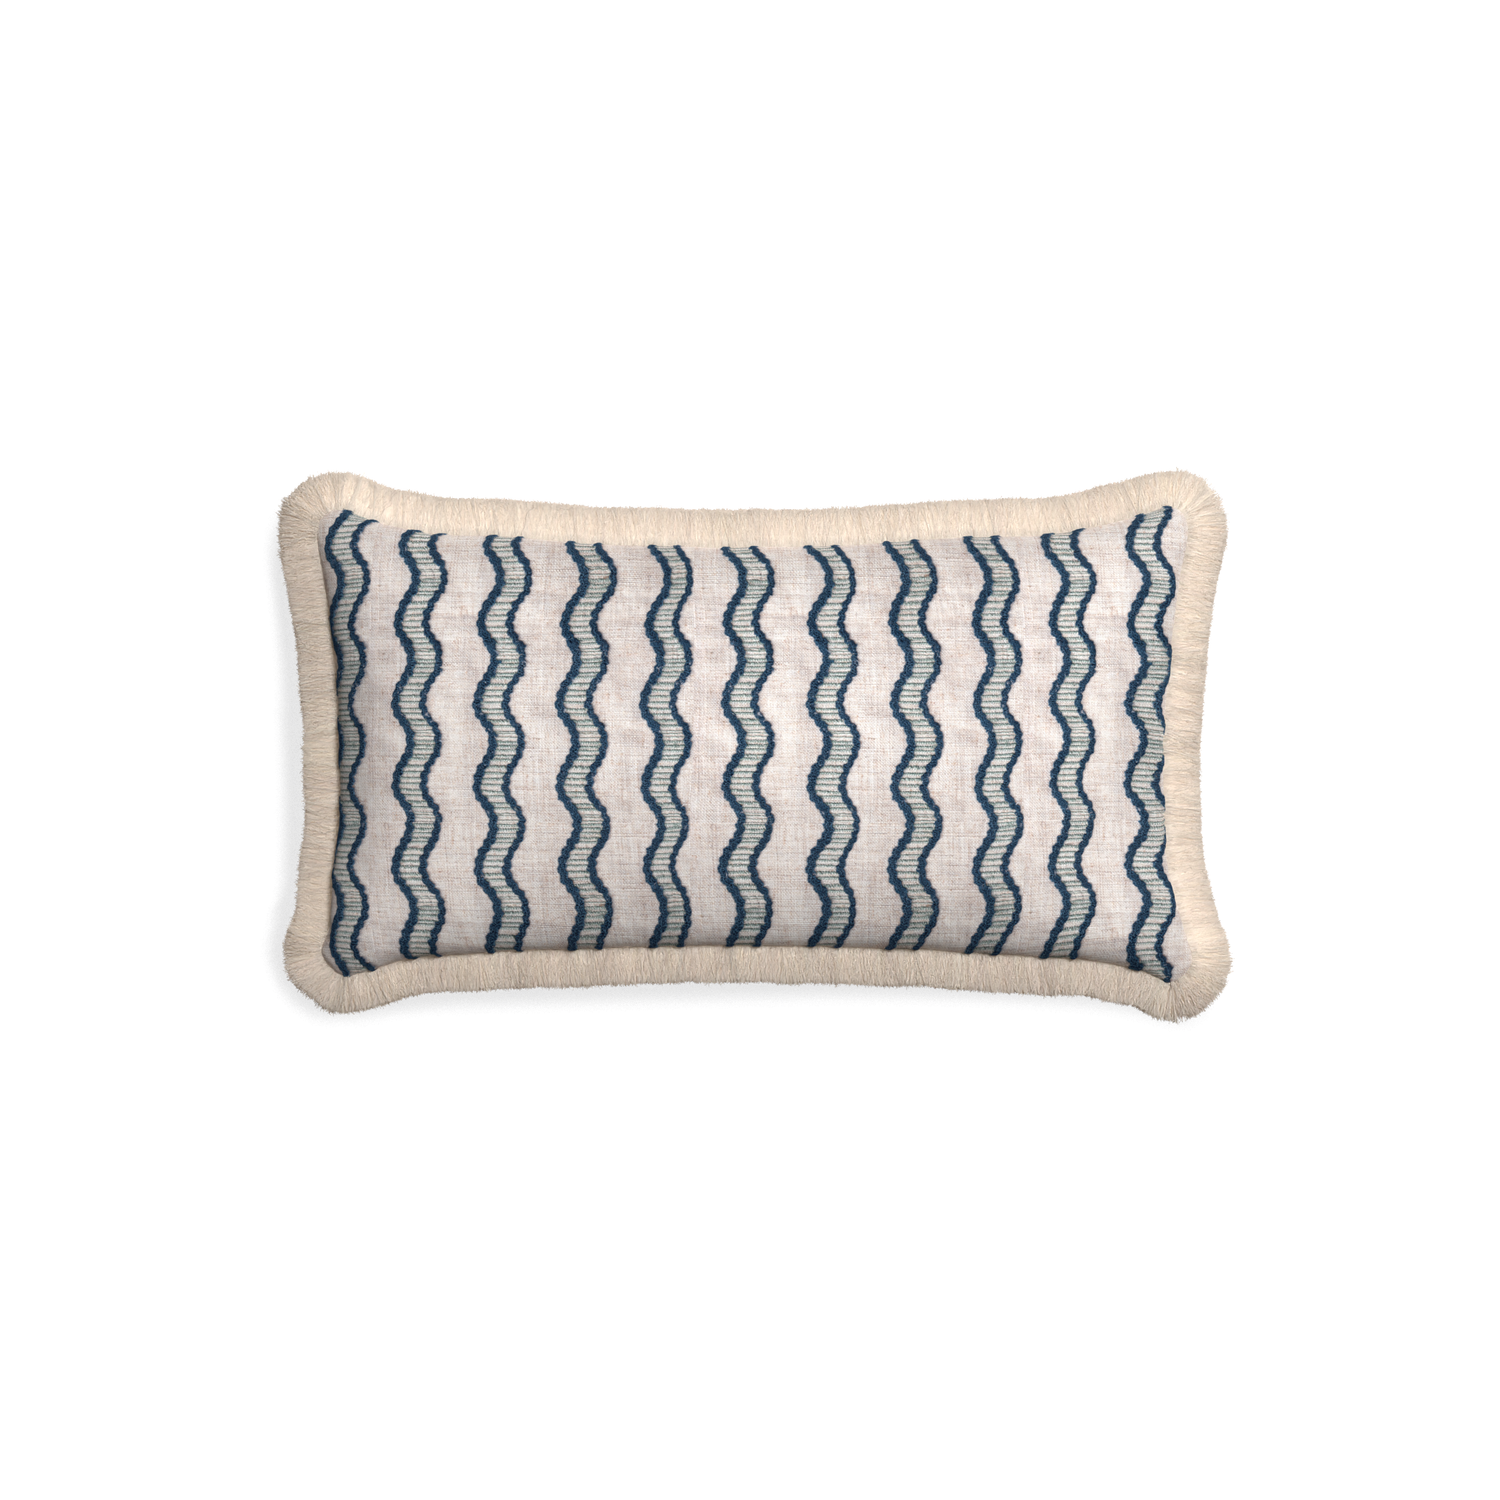 Petite-lumbar beatrice custom embroidered wavepillow with cream fringe on white background